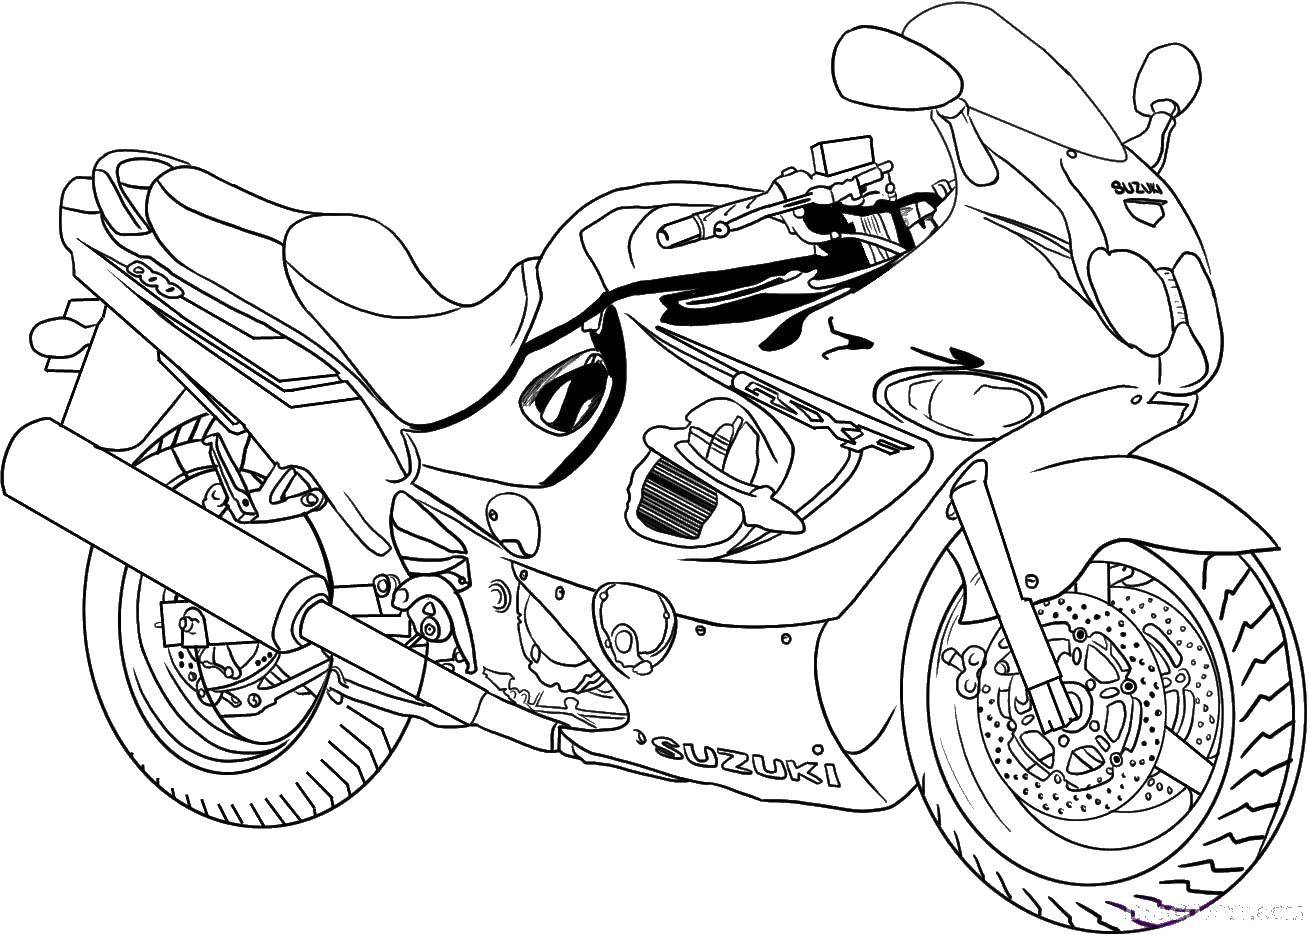 Coloring Motorcycle. Category motorcycle. Tags:  two wheel, motorcycle.